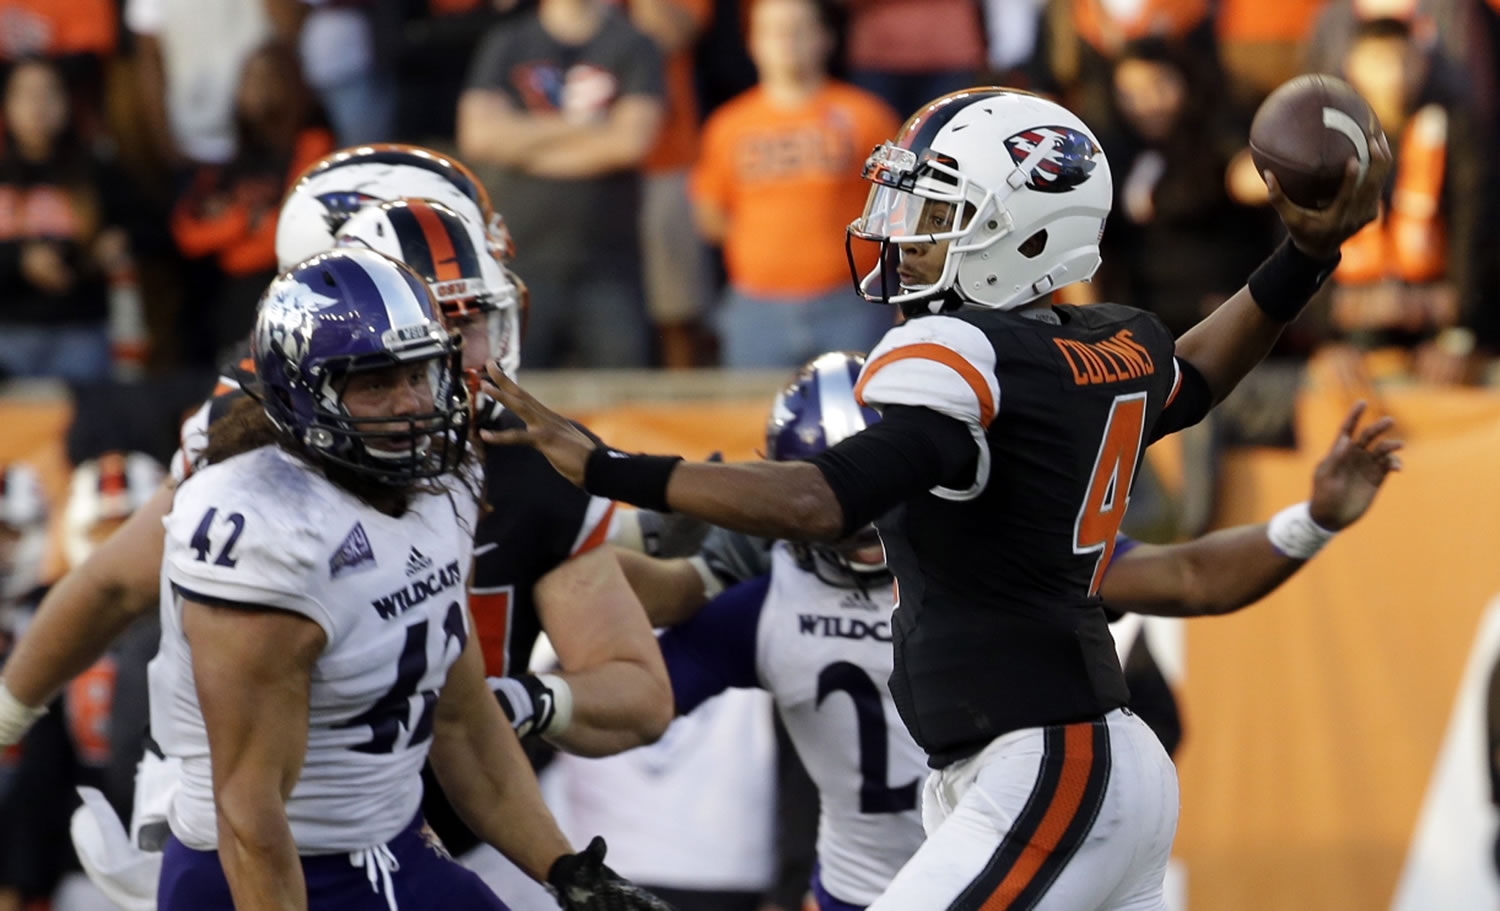 Oregon State quarterback Seth Collins, right, throws as Weber State defensive lineman Jonathan Carlson watches during the second half of an NCAA college football in Corvallis, Ore., Friday, Sept. 4, 2015. Oregon State won 26-7.